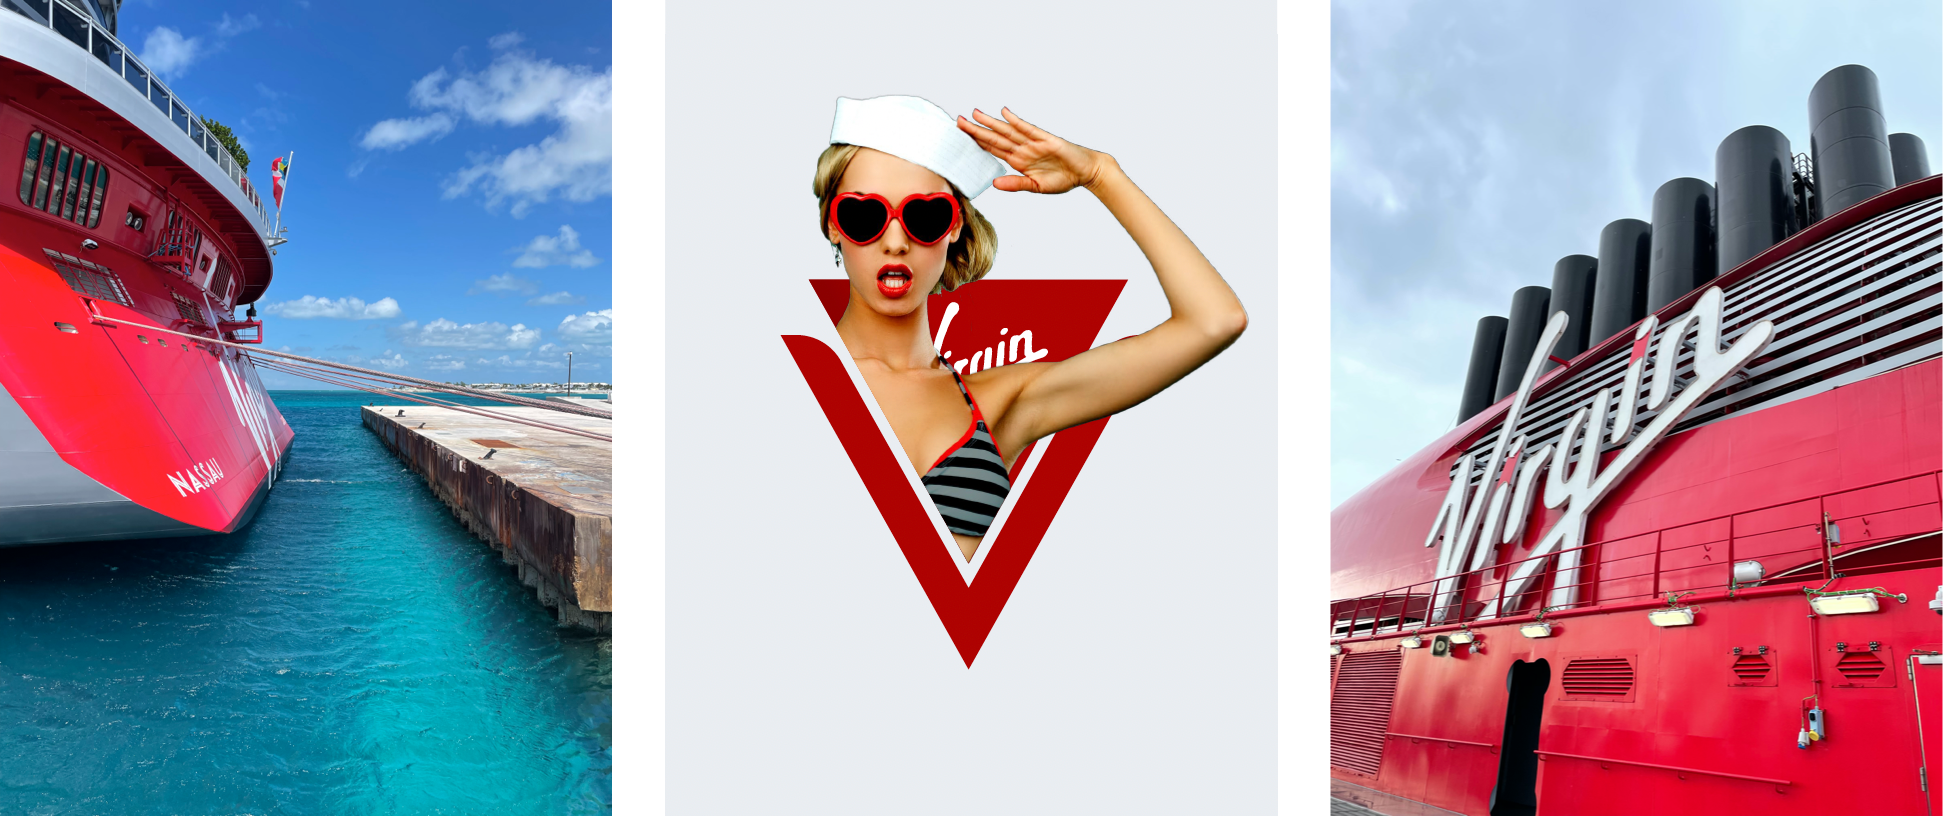 Three images. One of the ship docked. One illustration of a women in a sailor hat. And one of the Virgin logo on the side of the ship.